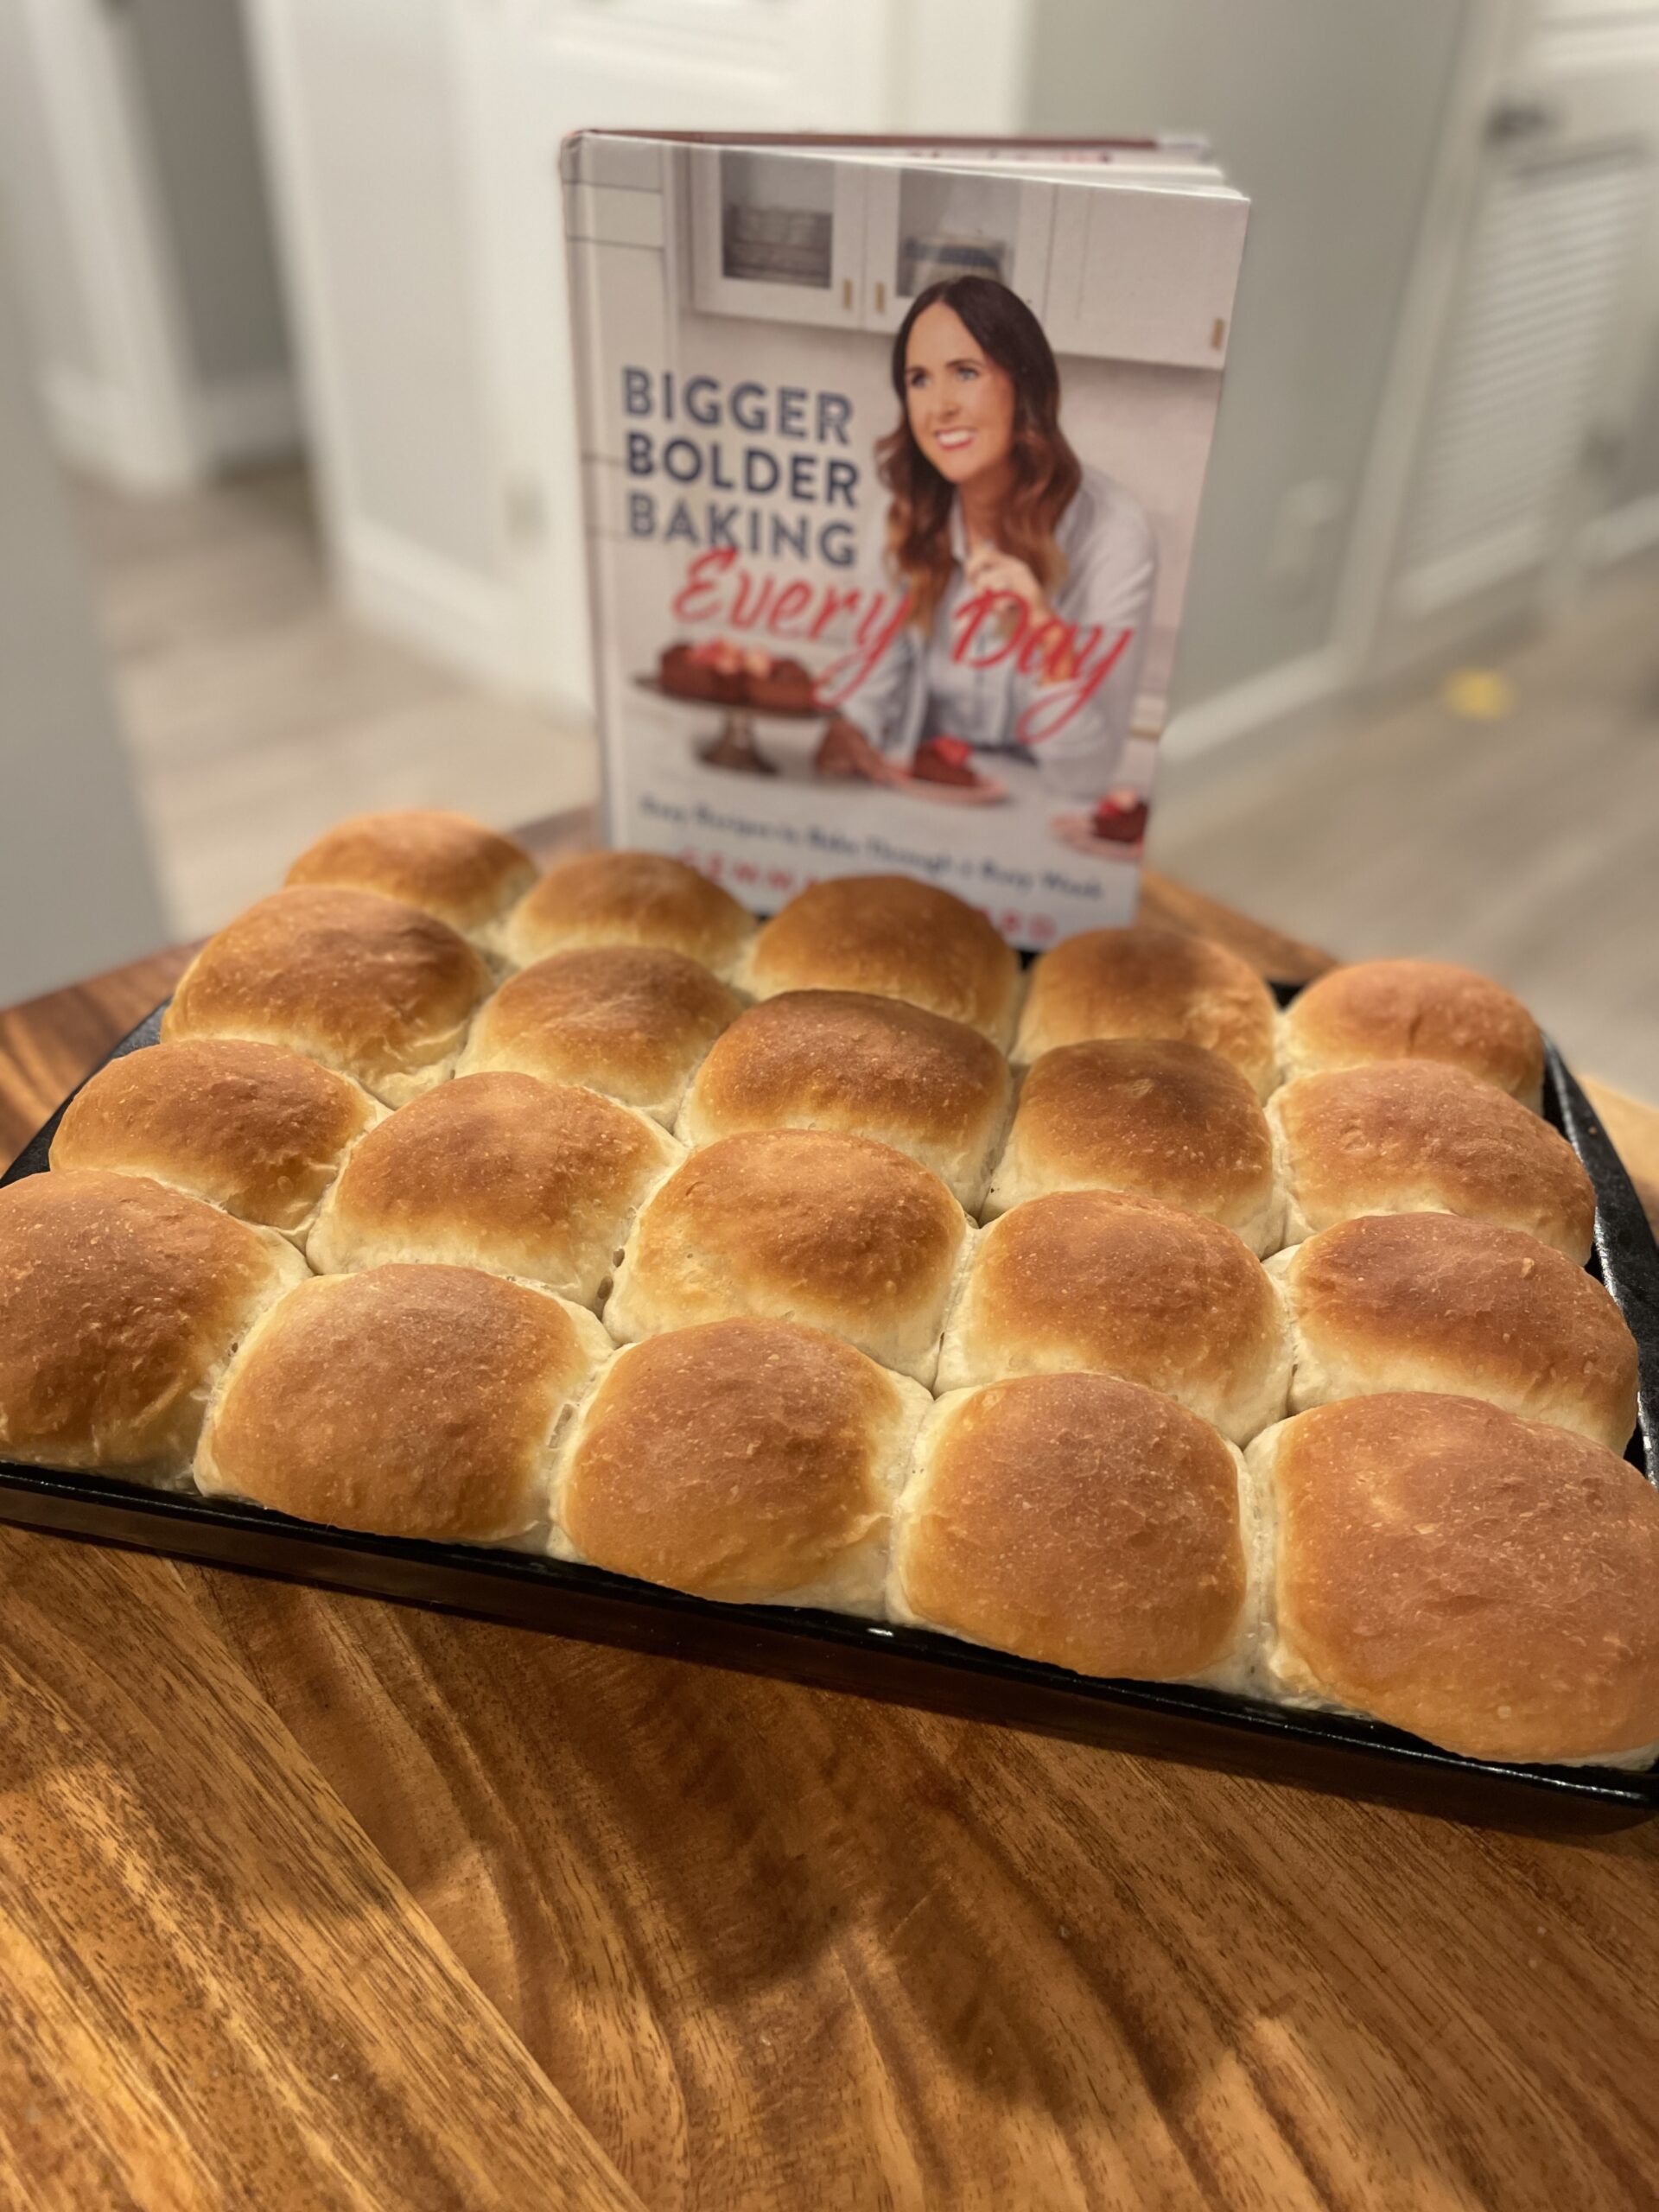 A tray of puffy, golden brown rolls in front of the cookbook Bigger Bolder Baking Every Day